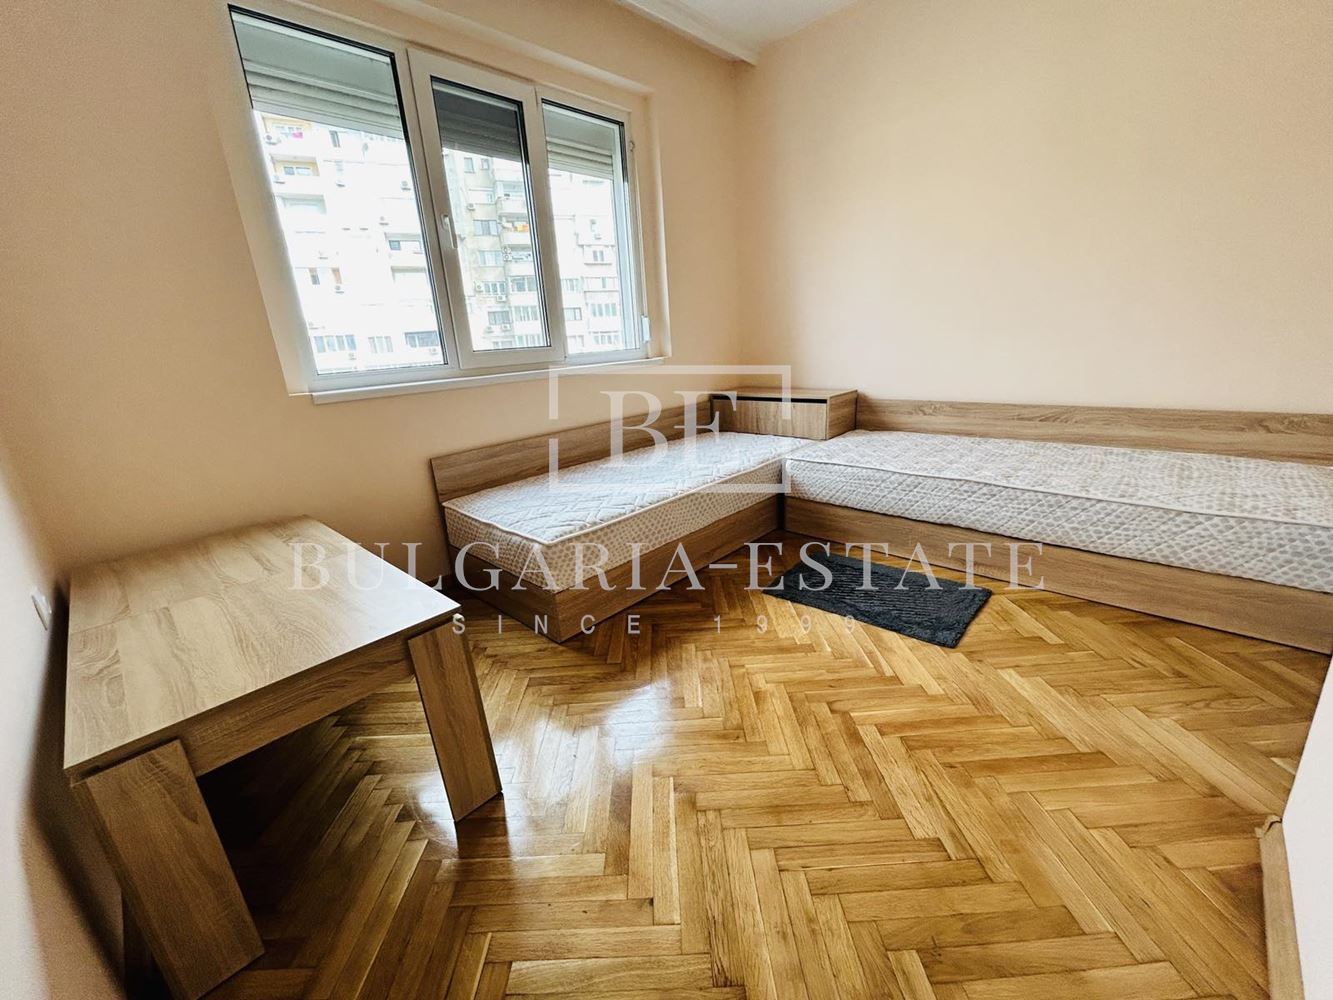 Wonderful two bedroom apartment in the center of the town of. Varna - 0